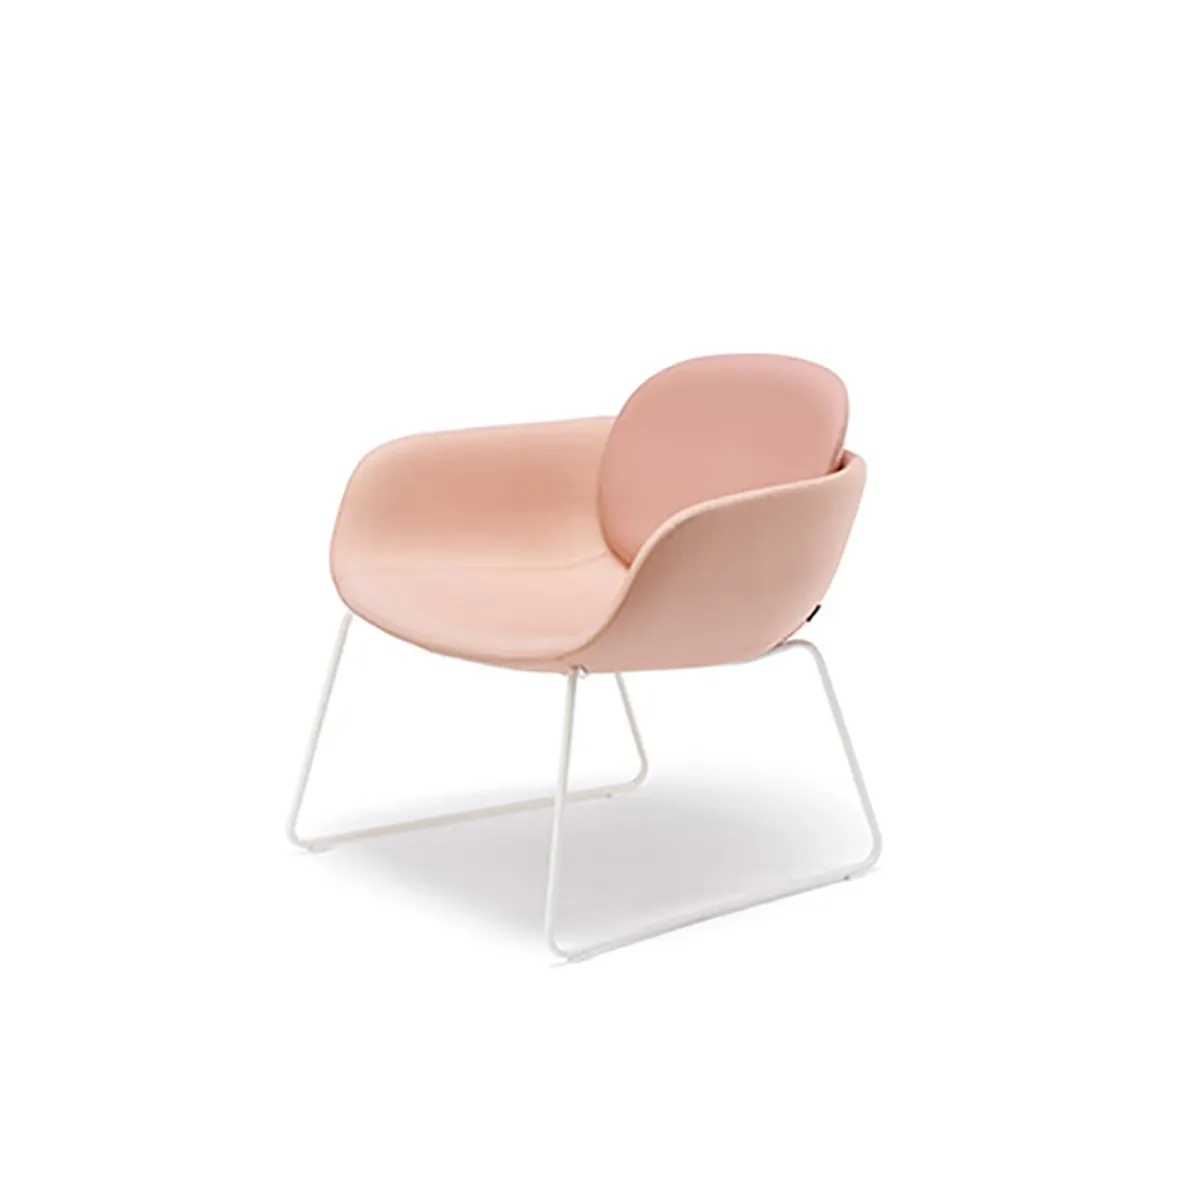 lyre-lounge-chair-with-sled-base-and-pink-upholstery